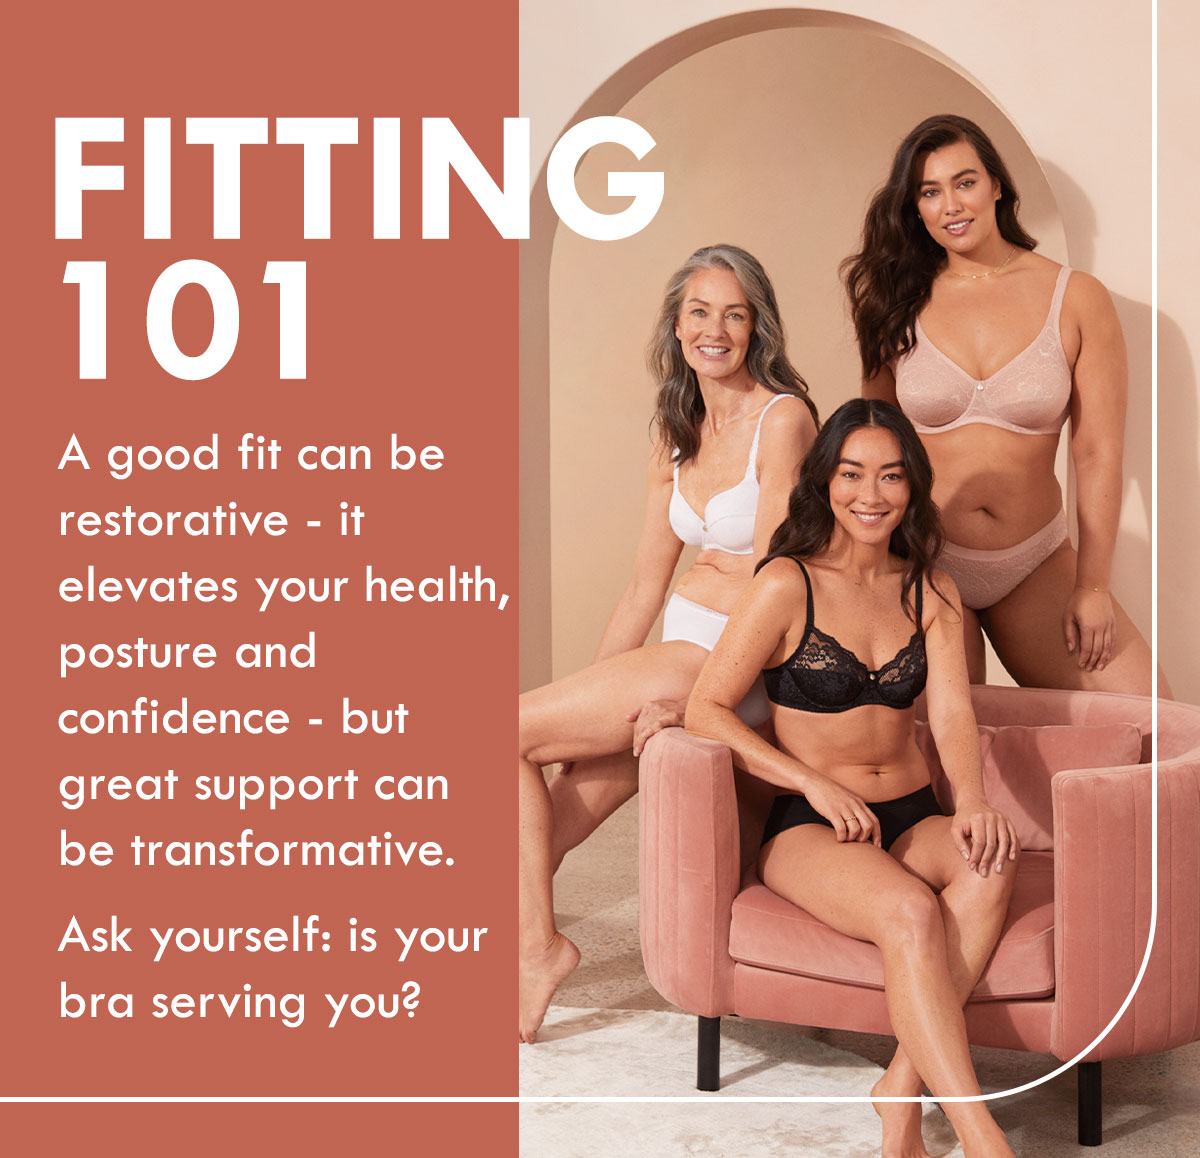 Berlei - Fitting 101. Ask yourself: is your bra serving you?